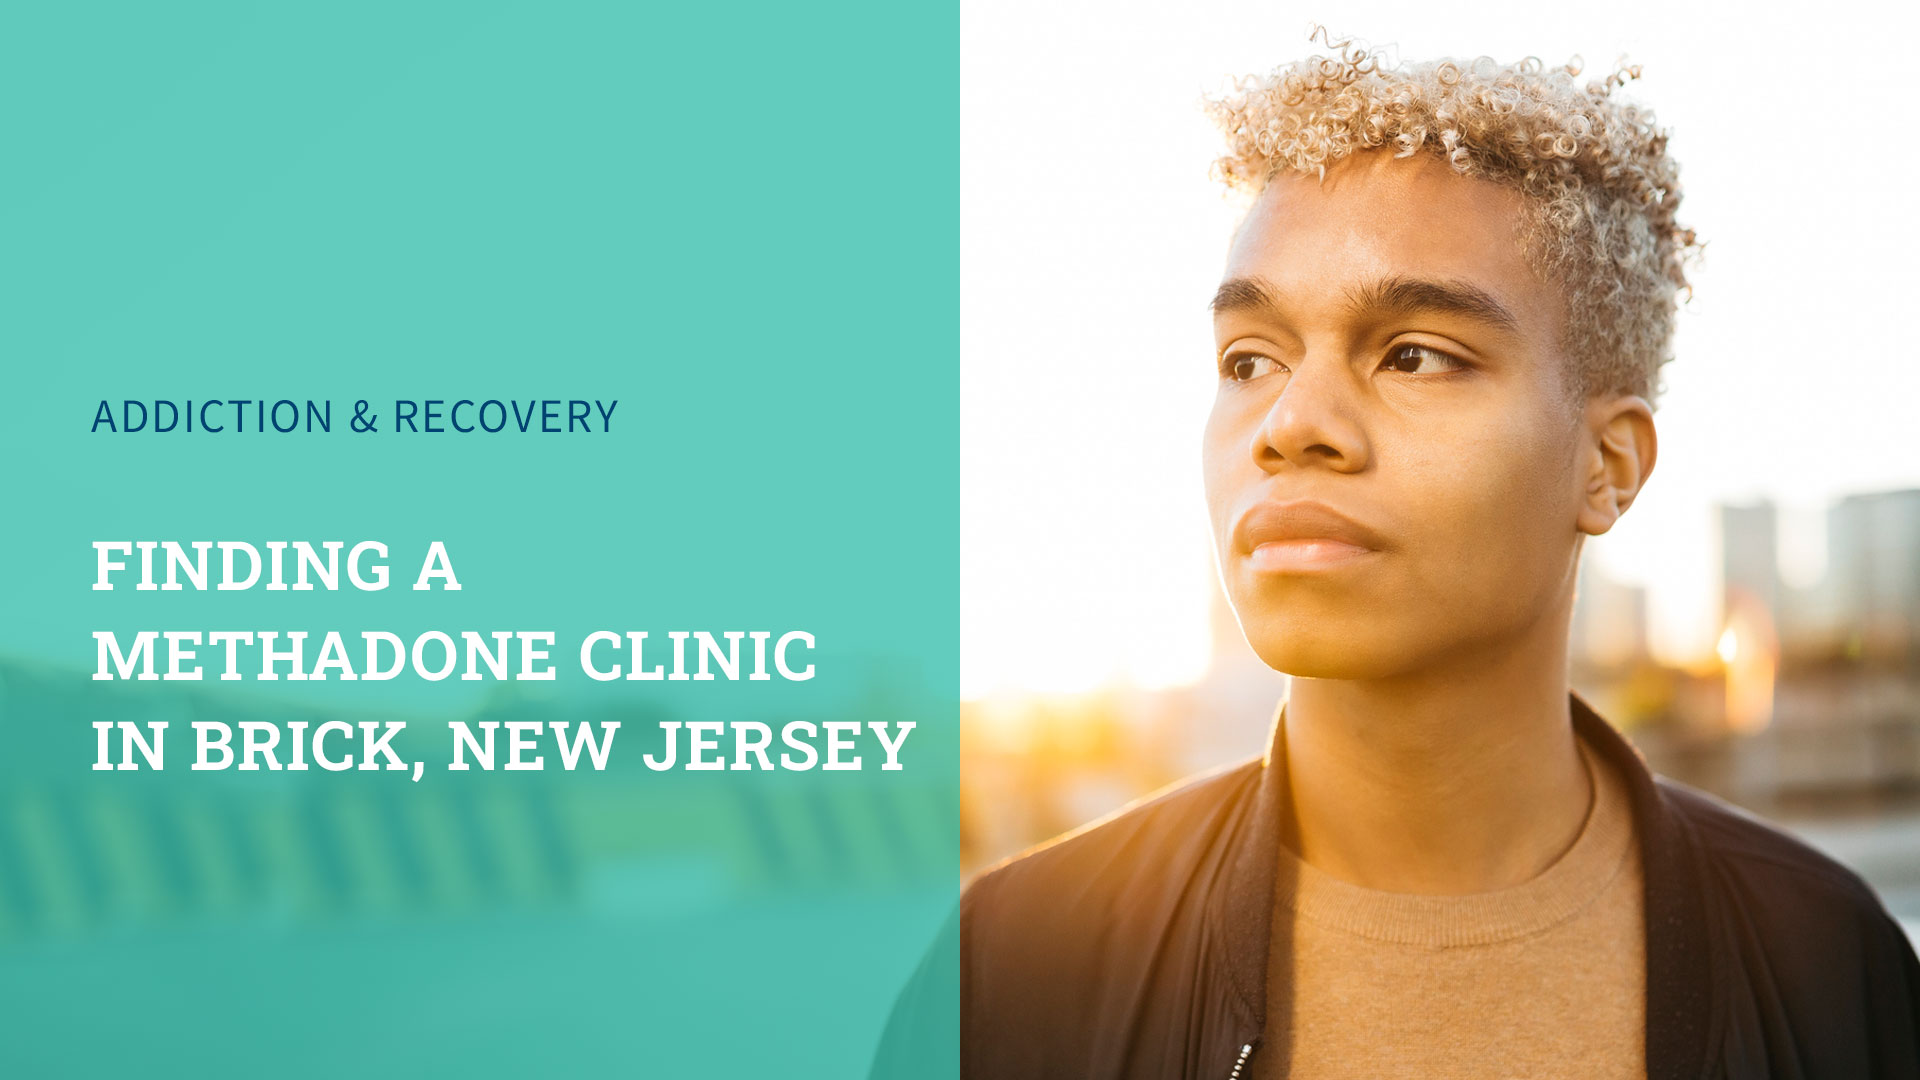 Finding a Methadone Clinic in Brick, New Jersey